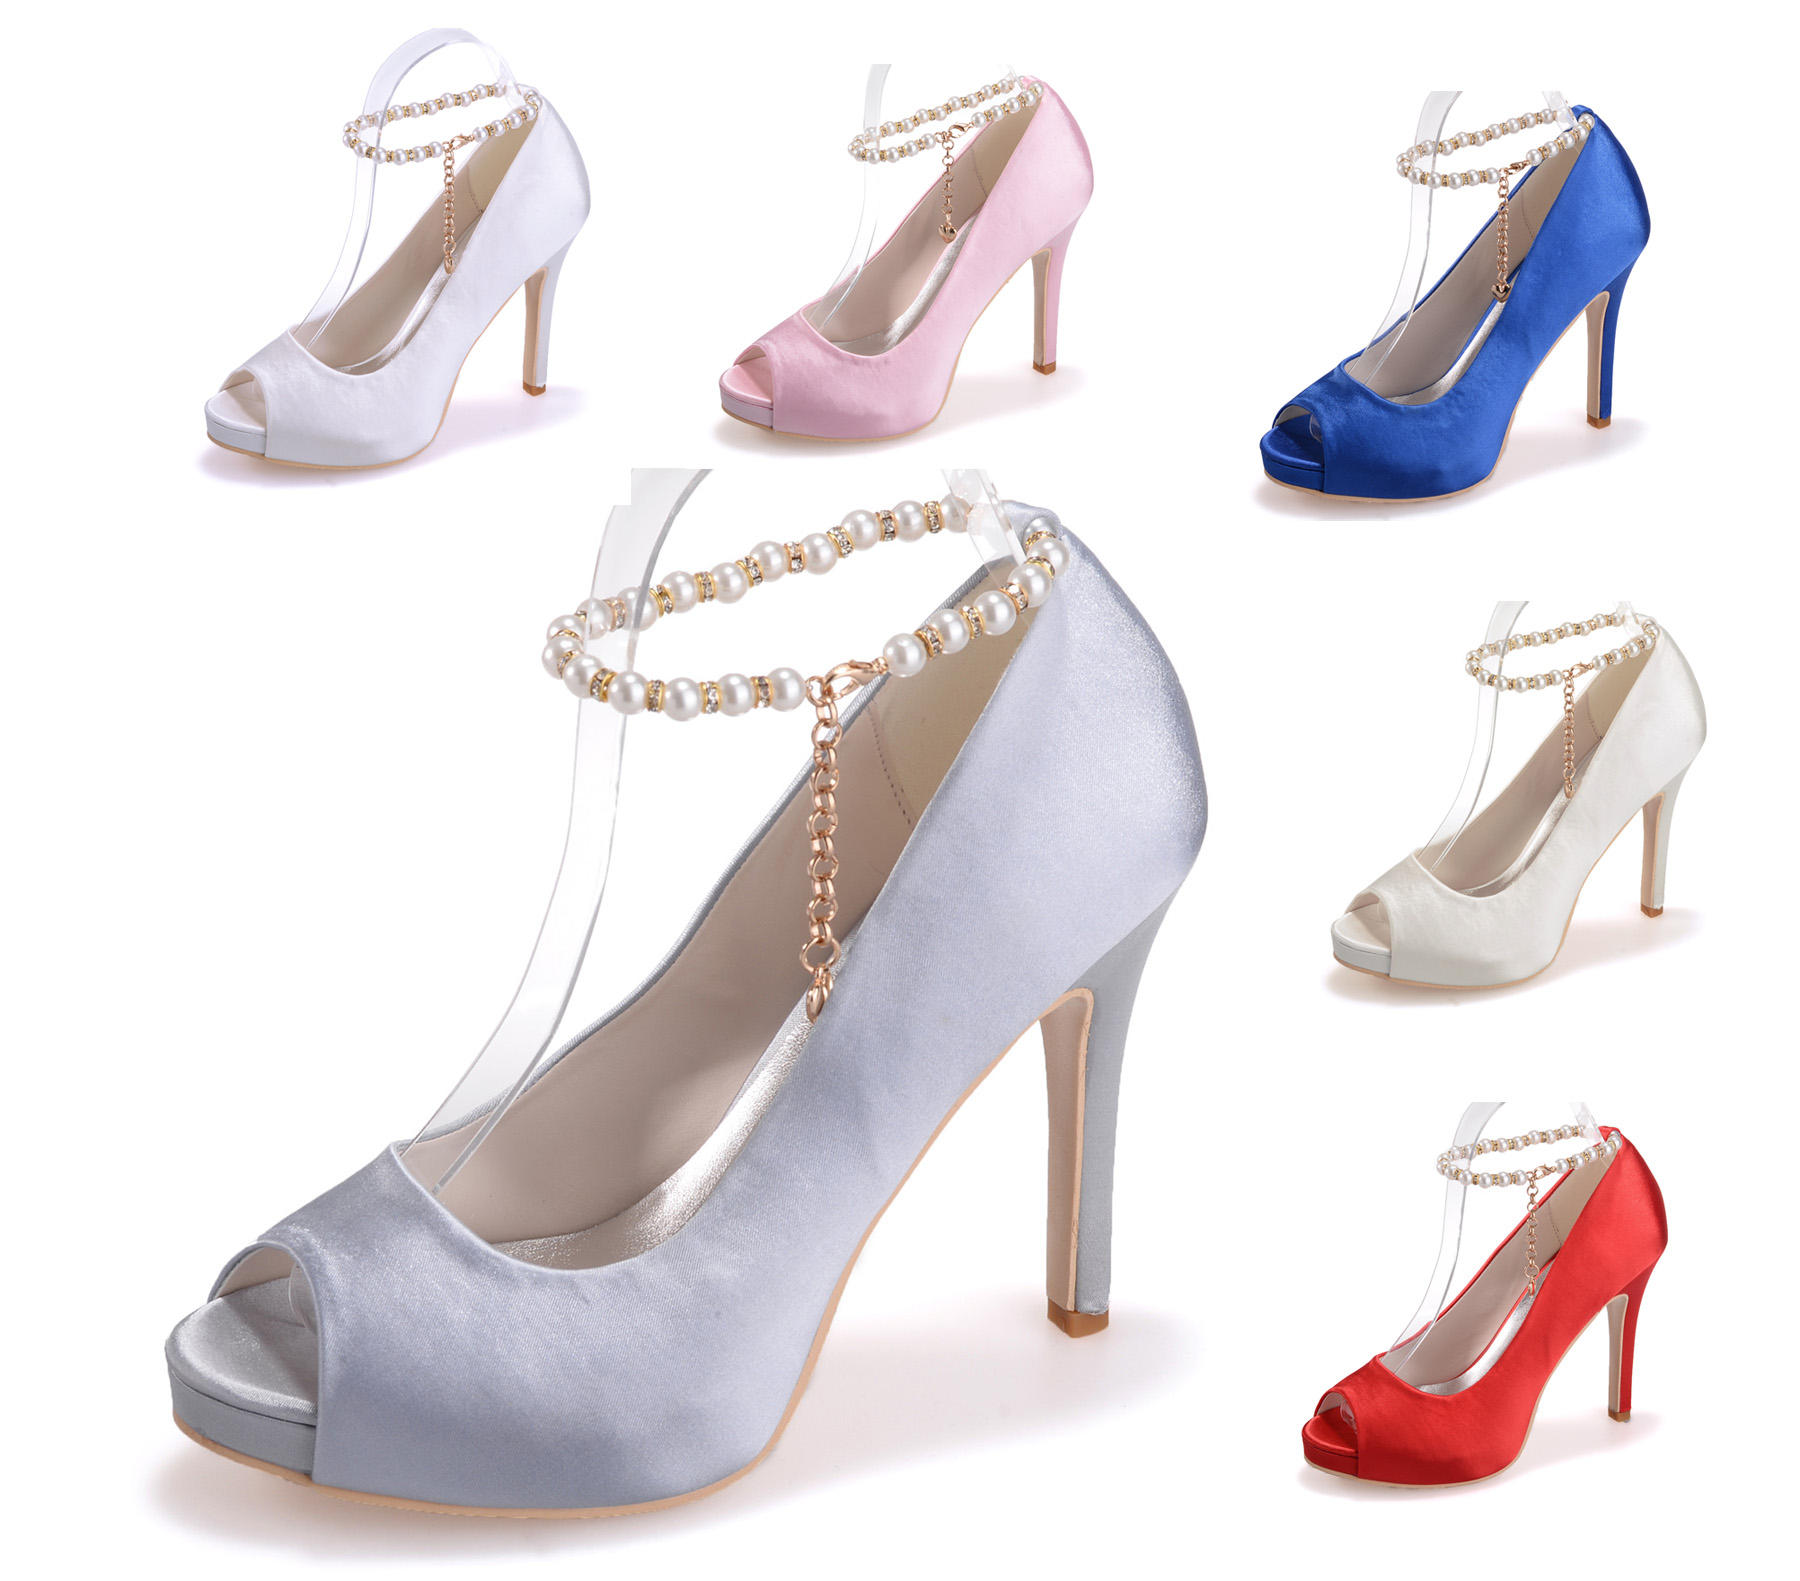 Woman's satin peep toe platform shoes high heel beading ankle strap platform wedding party prom pumps silver red pink blue white